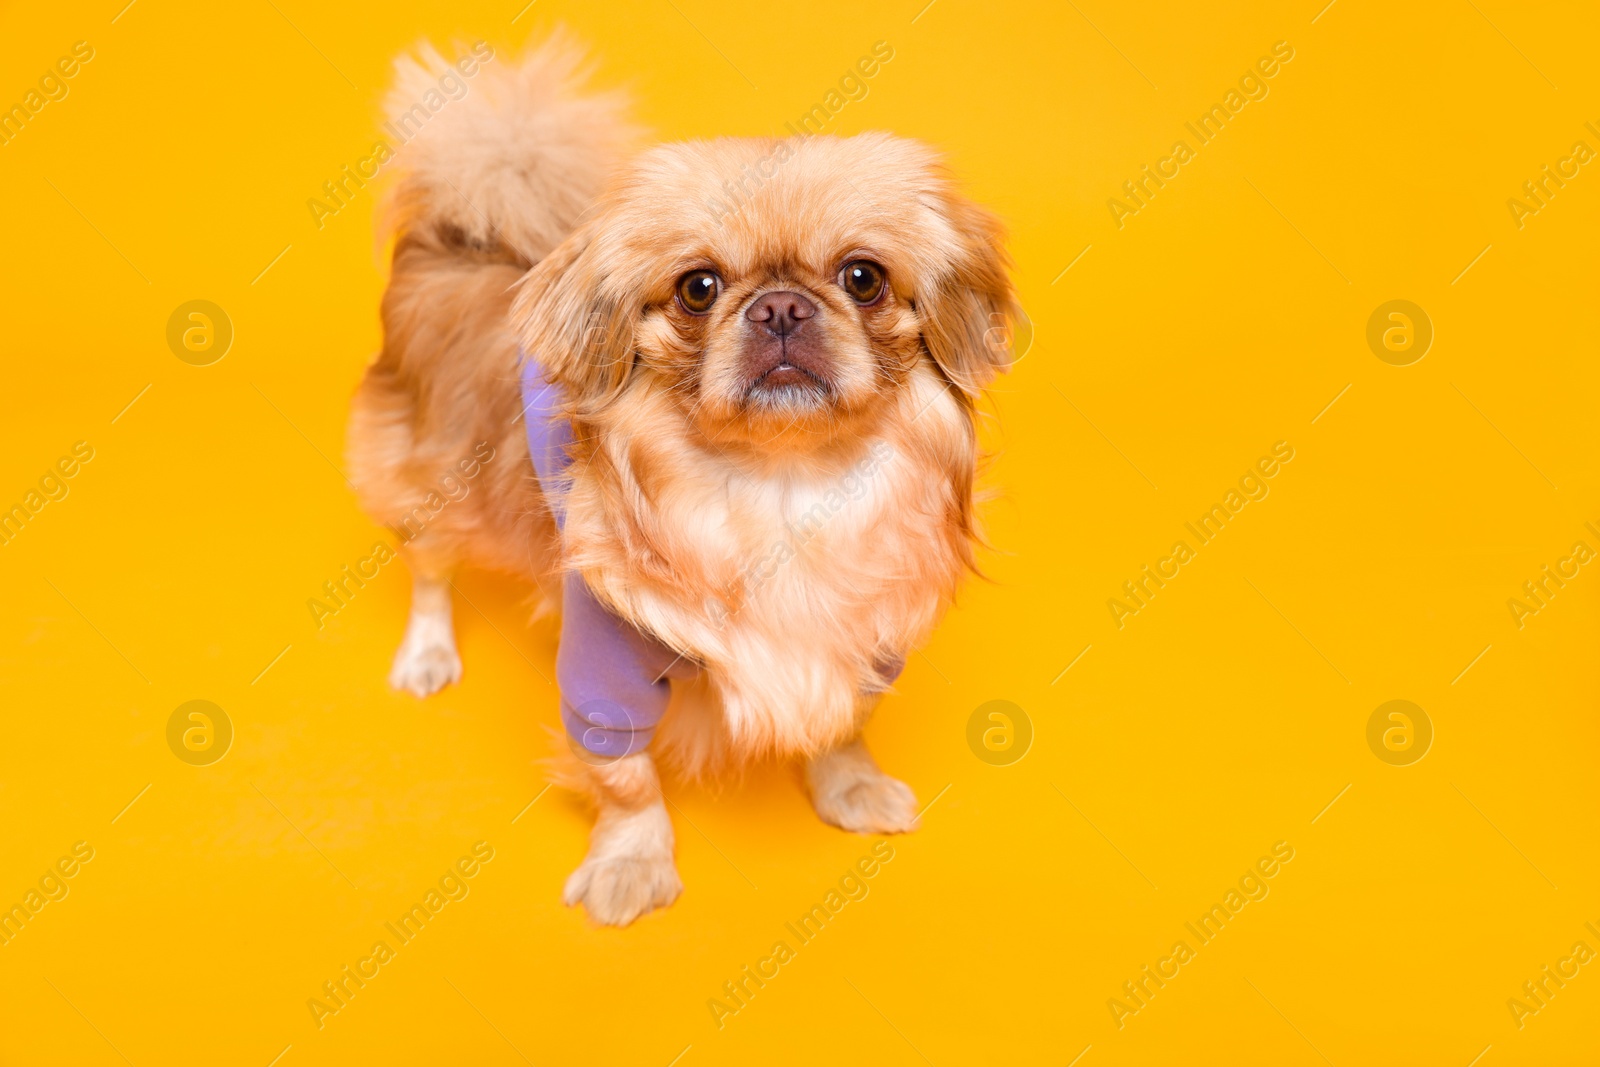 Photo of Cute Pekingese dog in pet clothes on yellow background